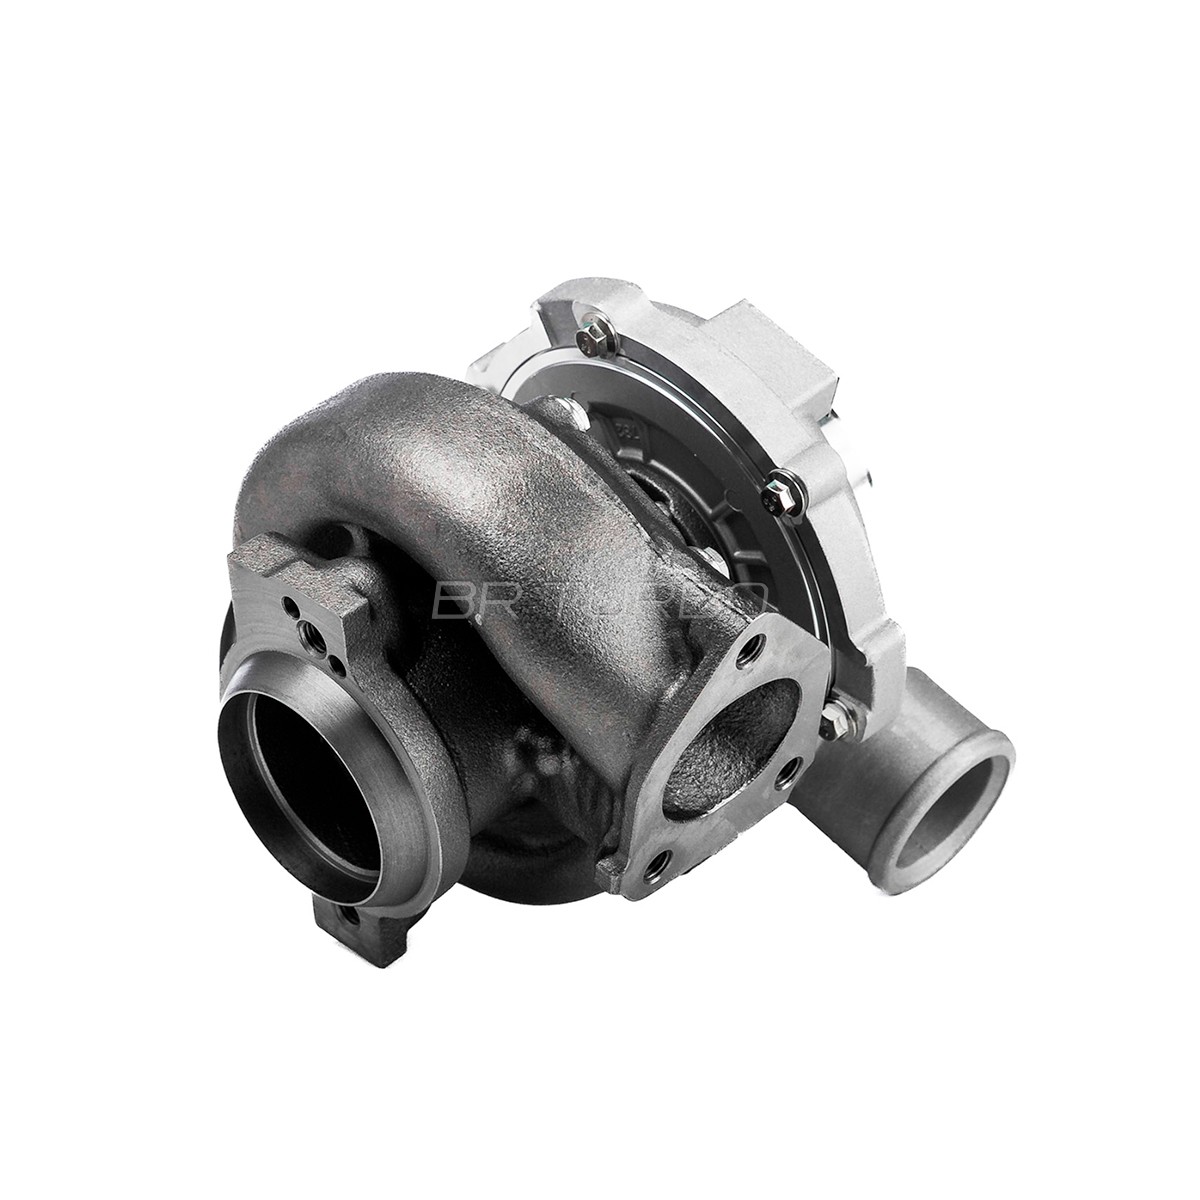 BRTX4012M Turbocharger BRTX4012M BR Turbo Turbo, with attachment material